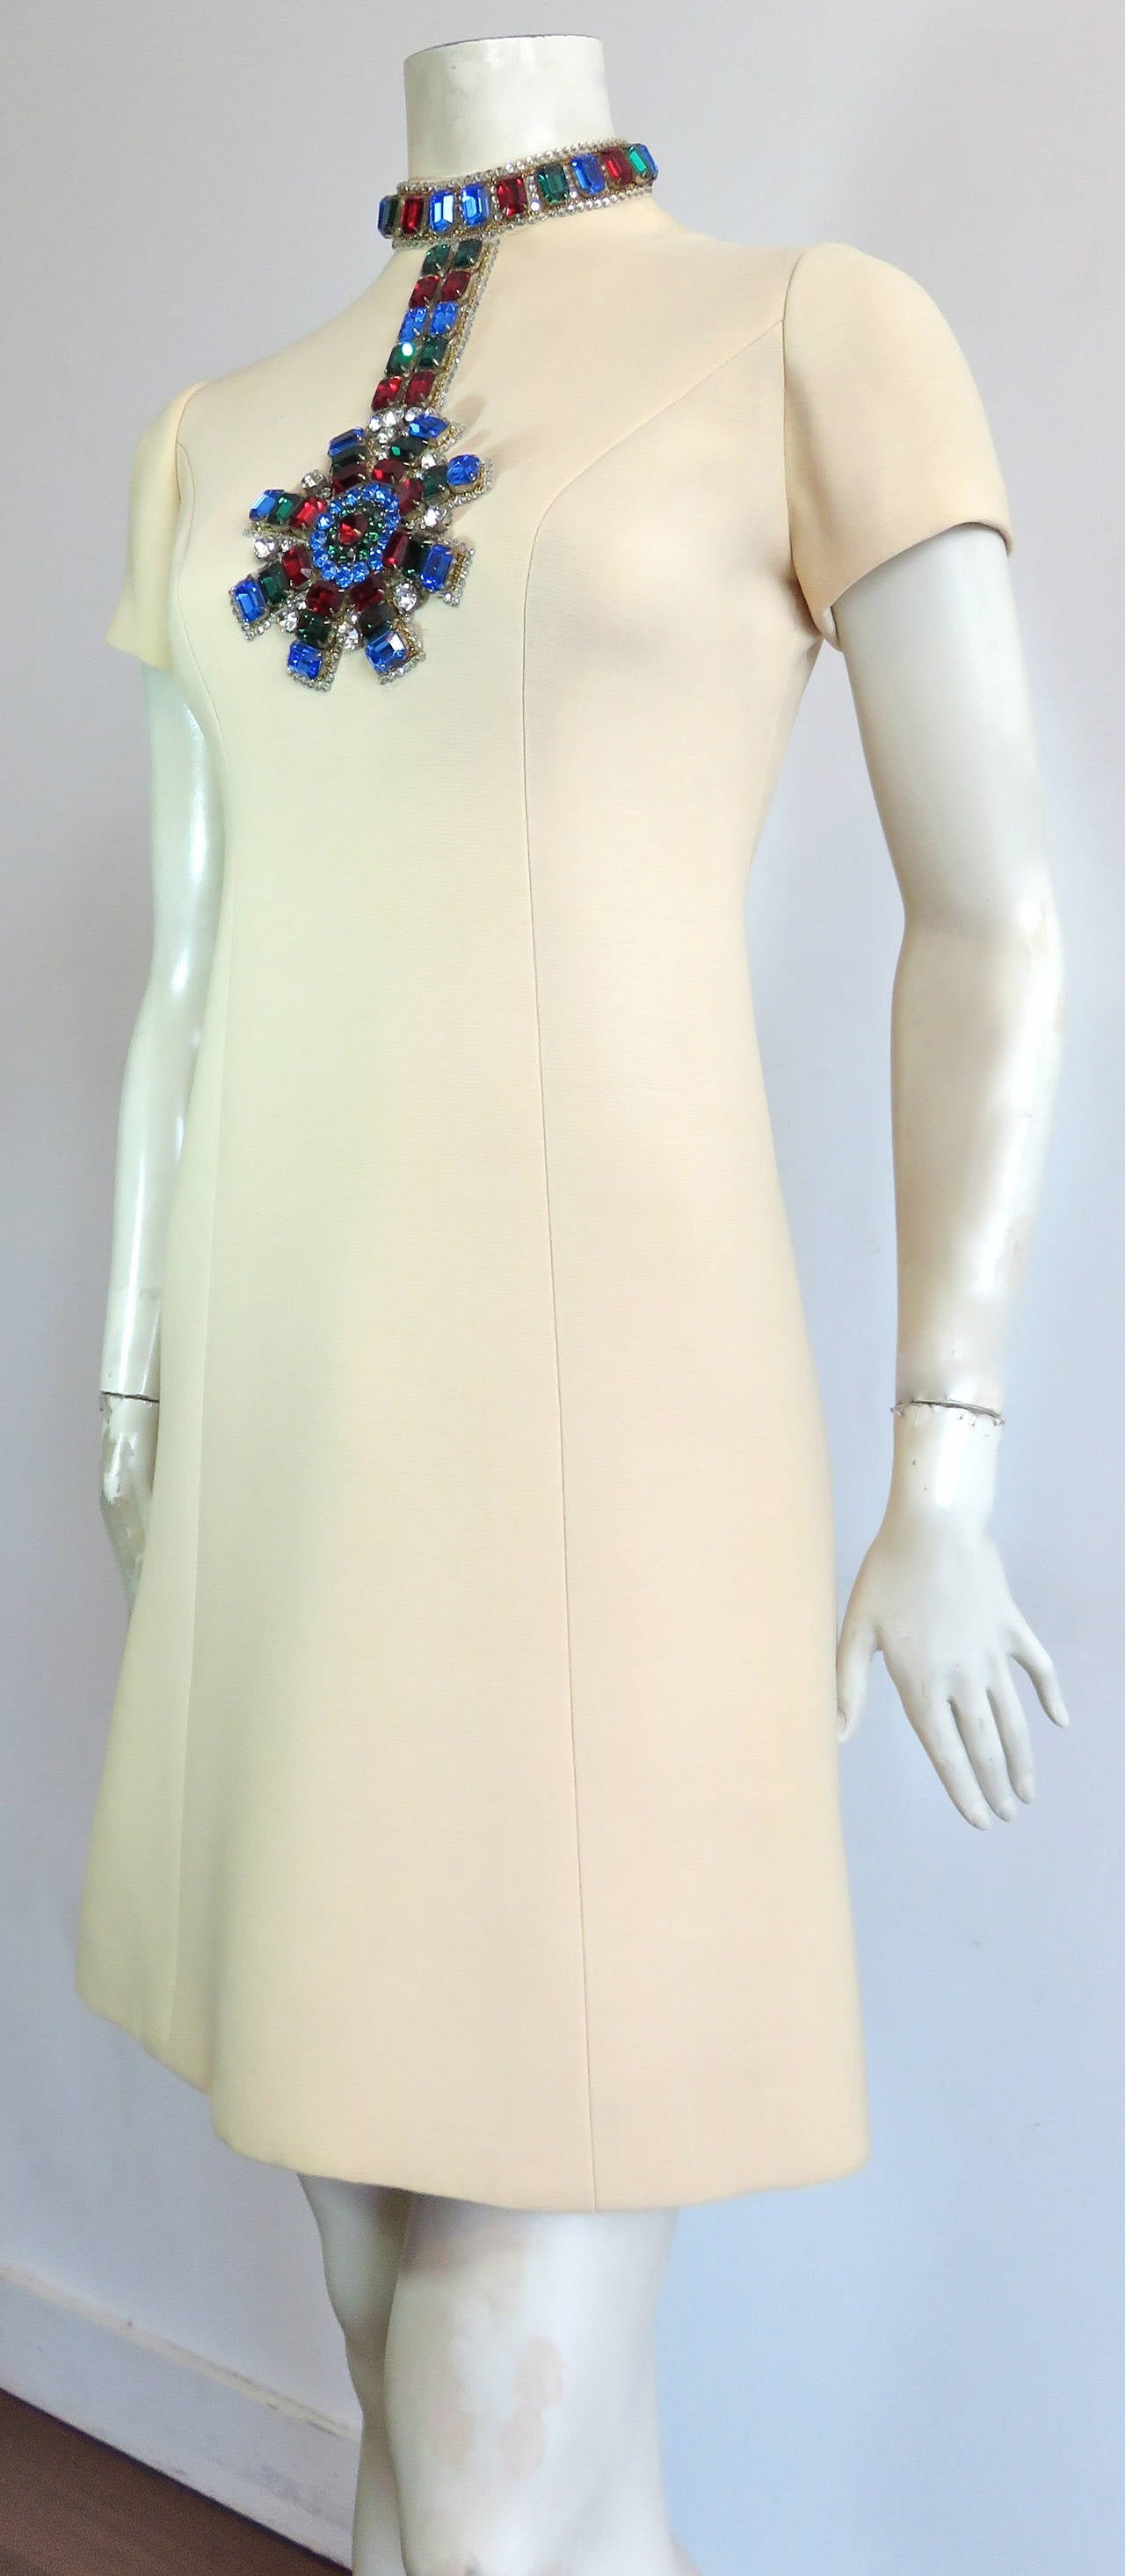 1969 NORMAN NORELL Iconic jeweled cocktail evening dress 3